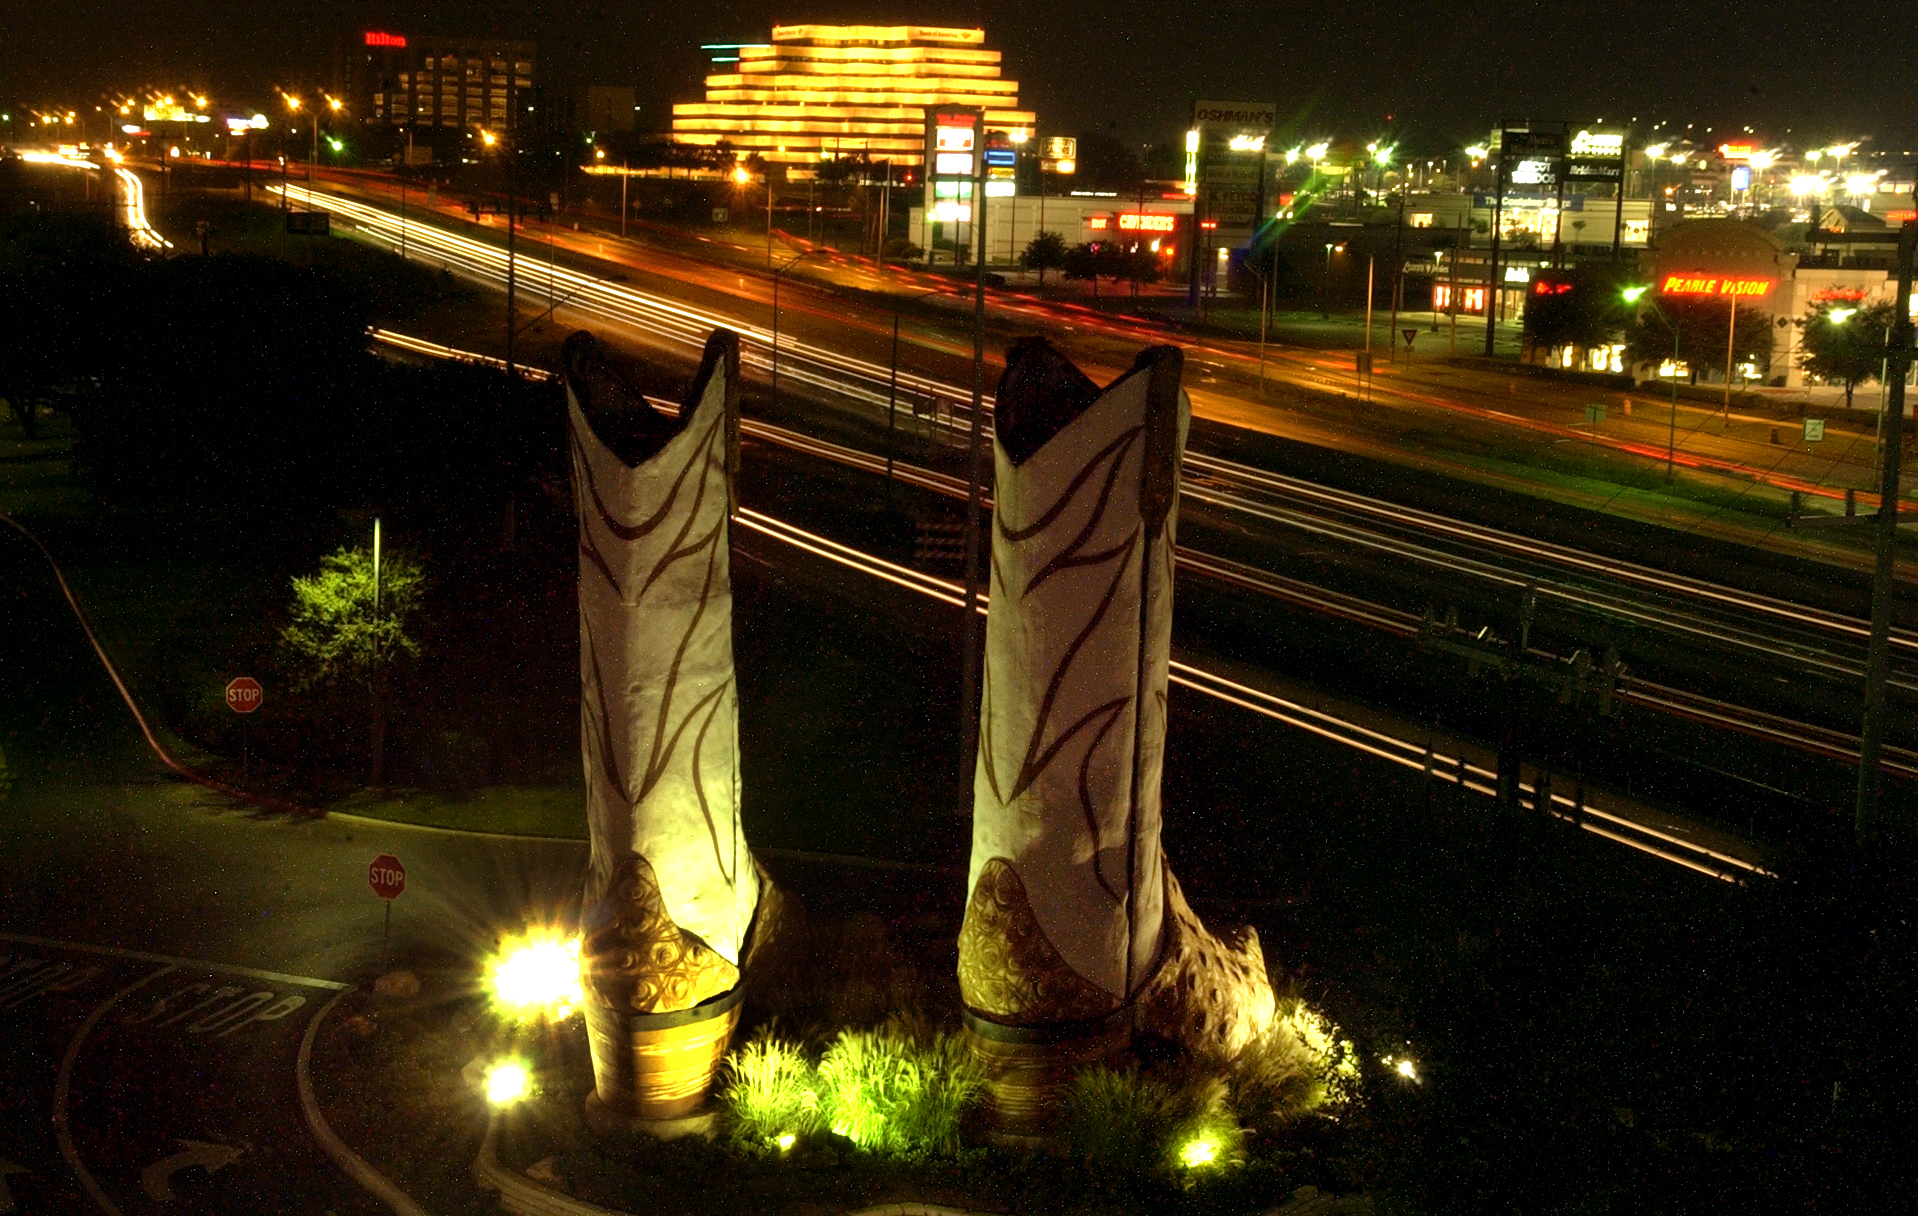 Iconic cowboy boots arrived at North Star Mall 43 years ago this week